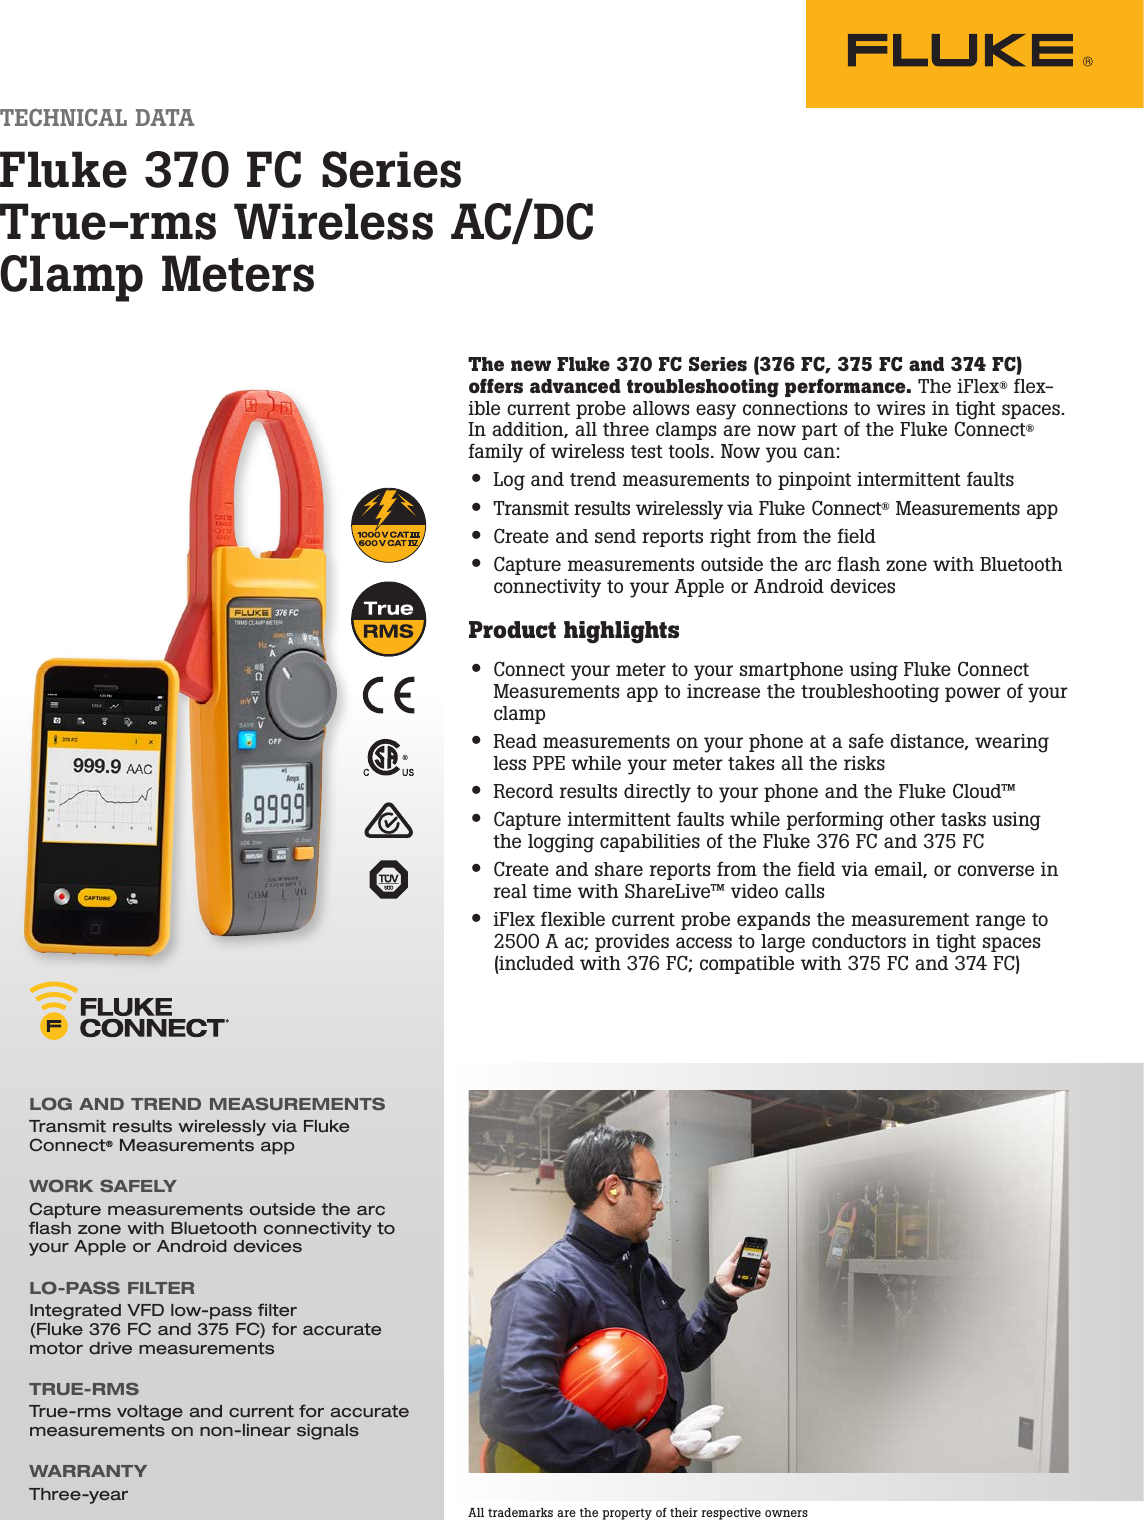 Page 1 of 5 - Fluke 370 FC Series True-rms Wireless AC/DC Clamp Meters